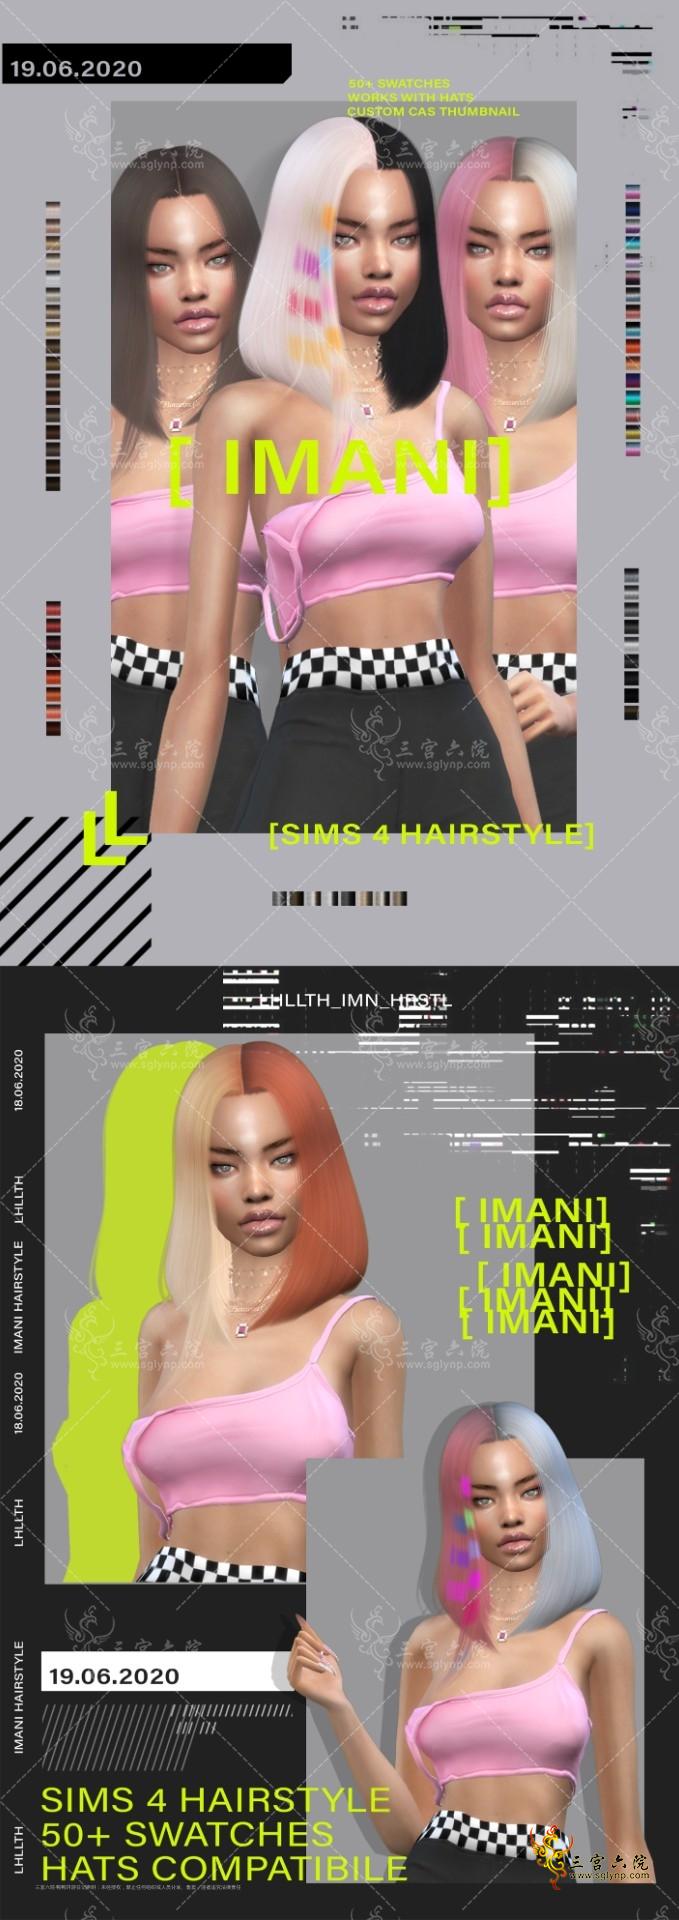 IMANI HAIRSTYLE GRAPHIC PATREON.png